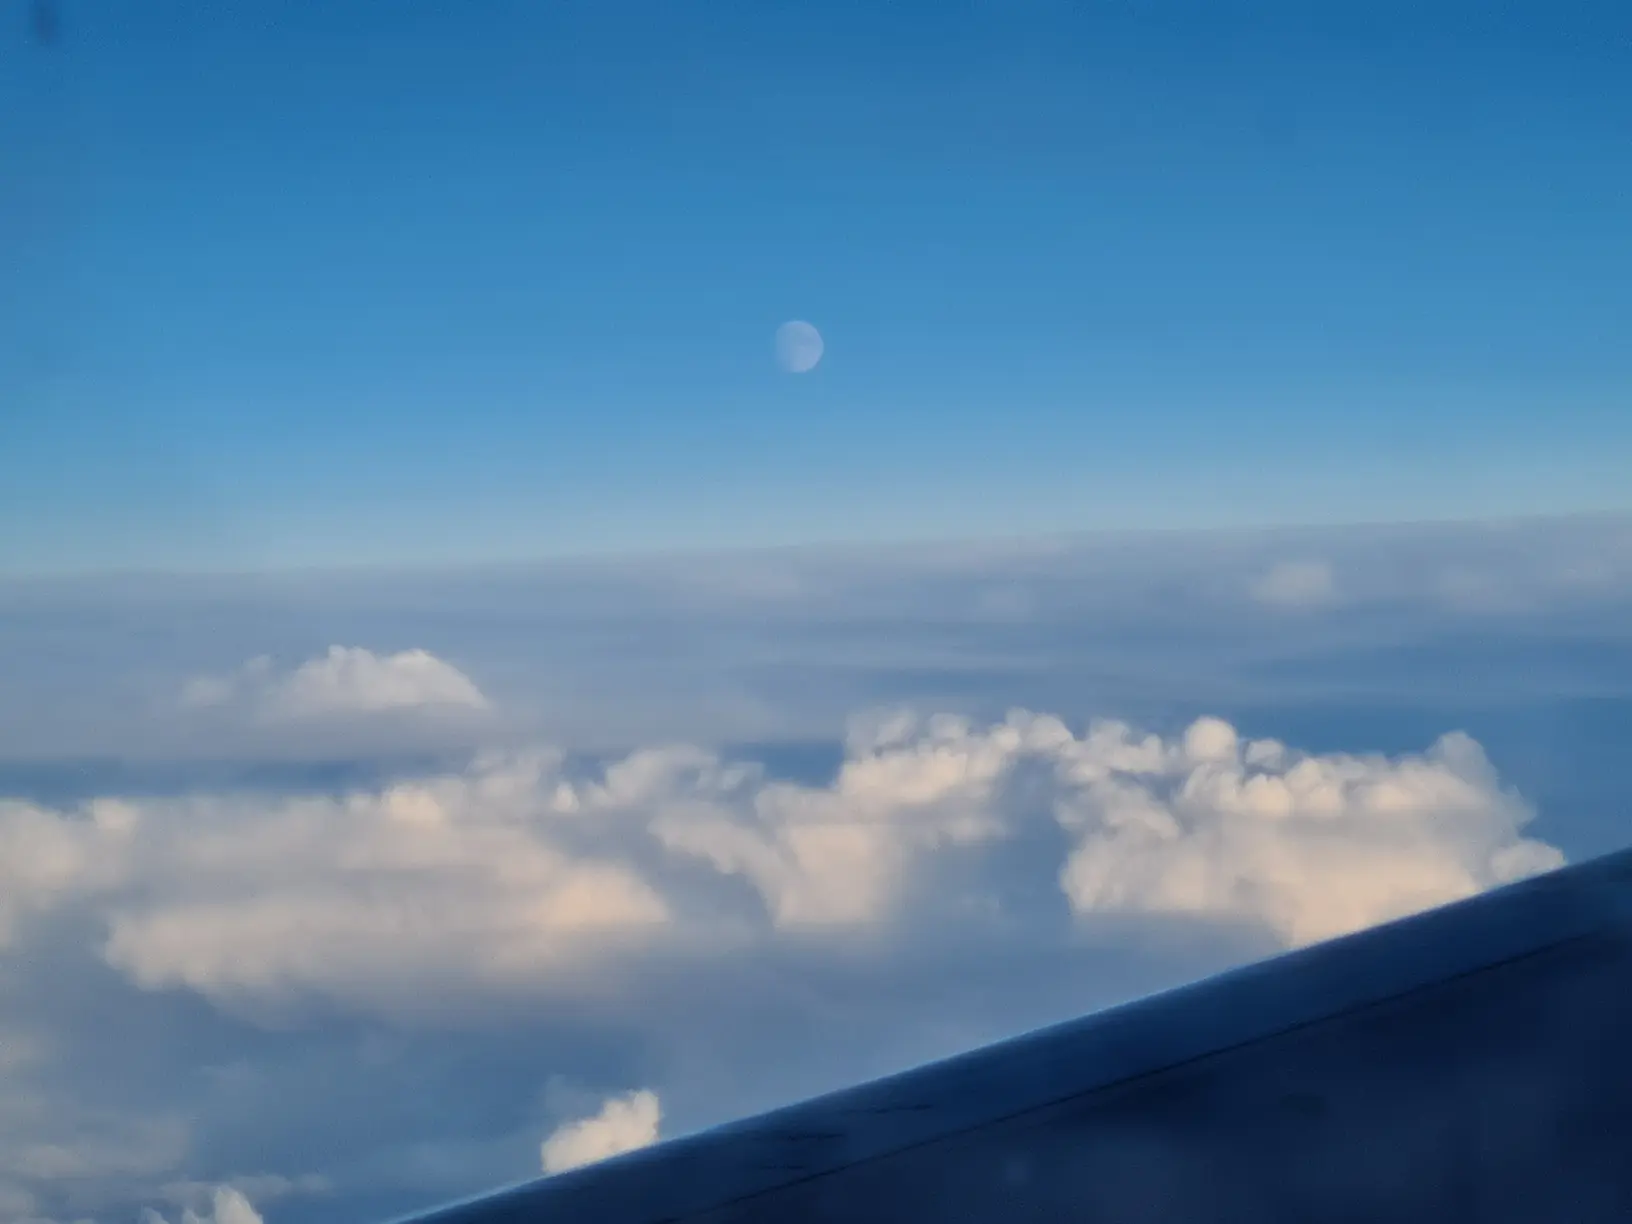 photo of the moon visible during daylight taken on plane